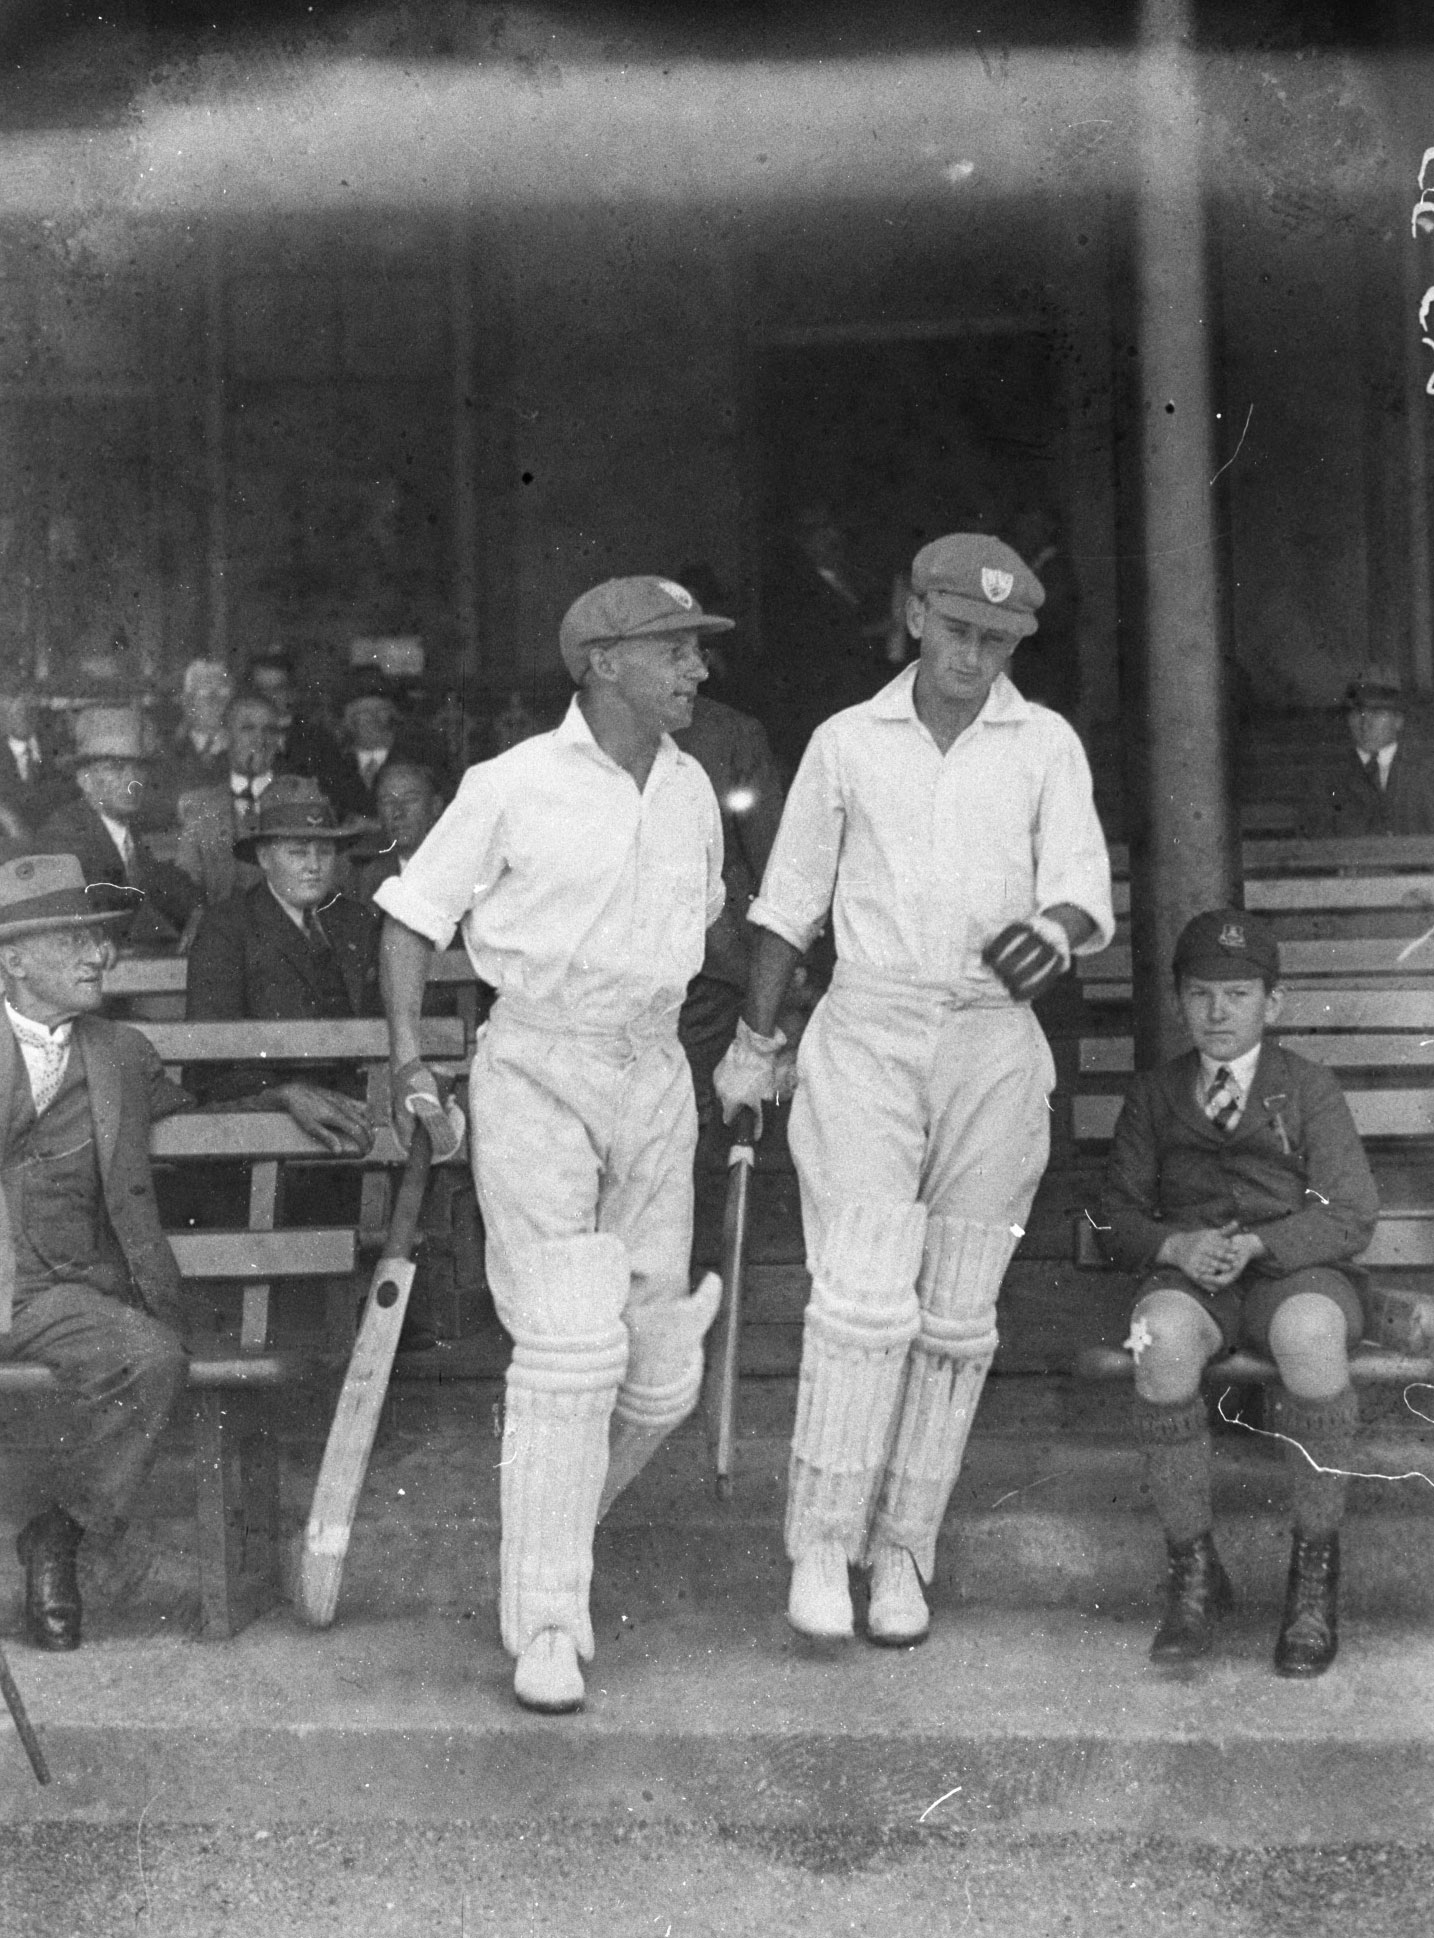 Don Bradman (left) and Stan McCabe take the field, 1932.